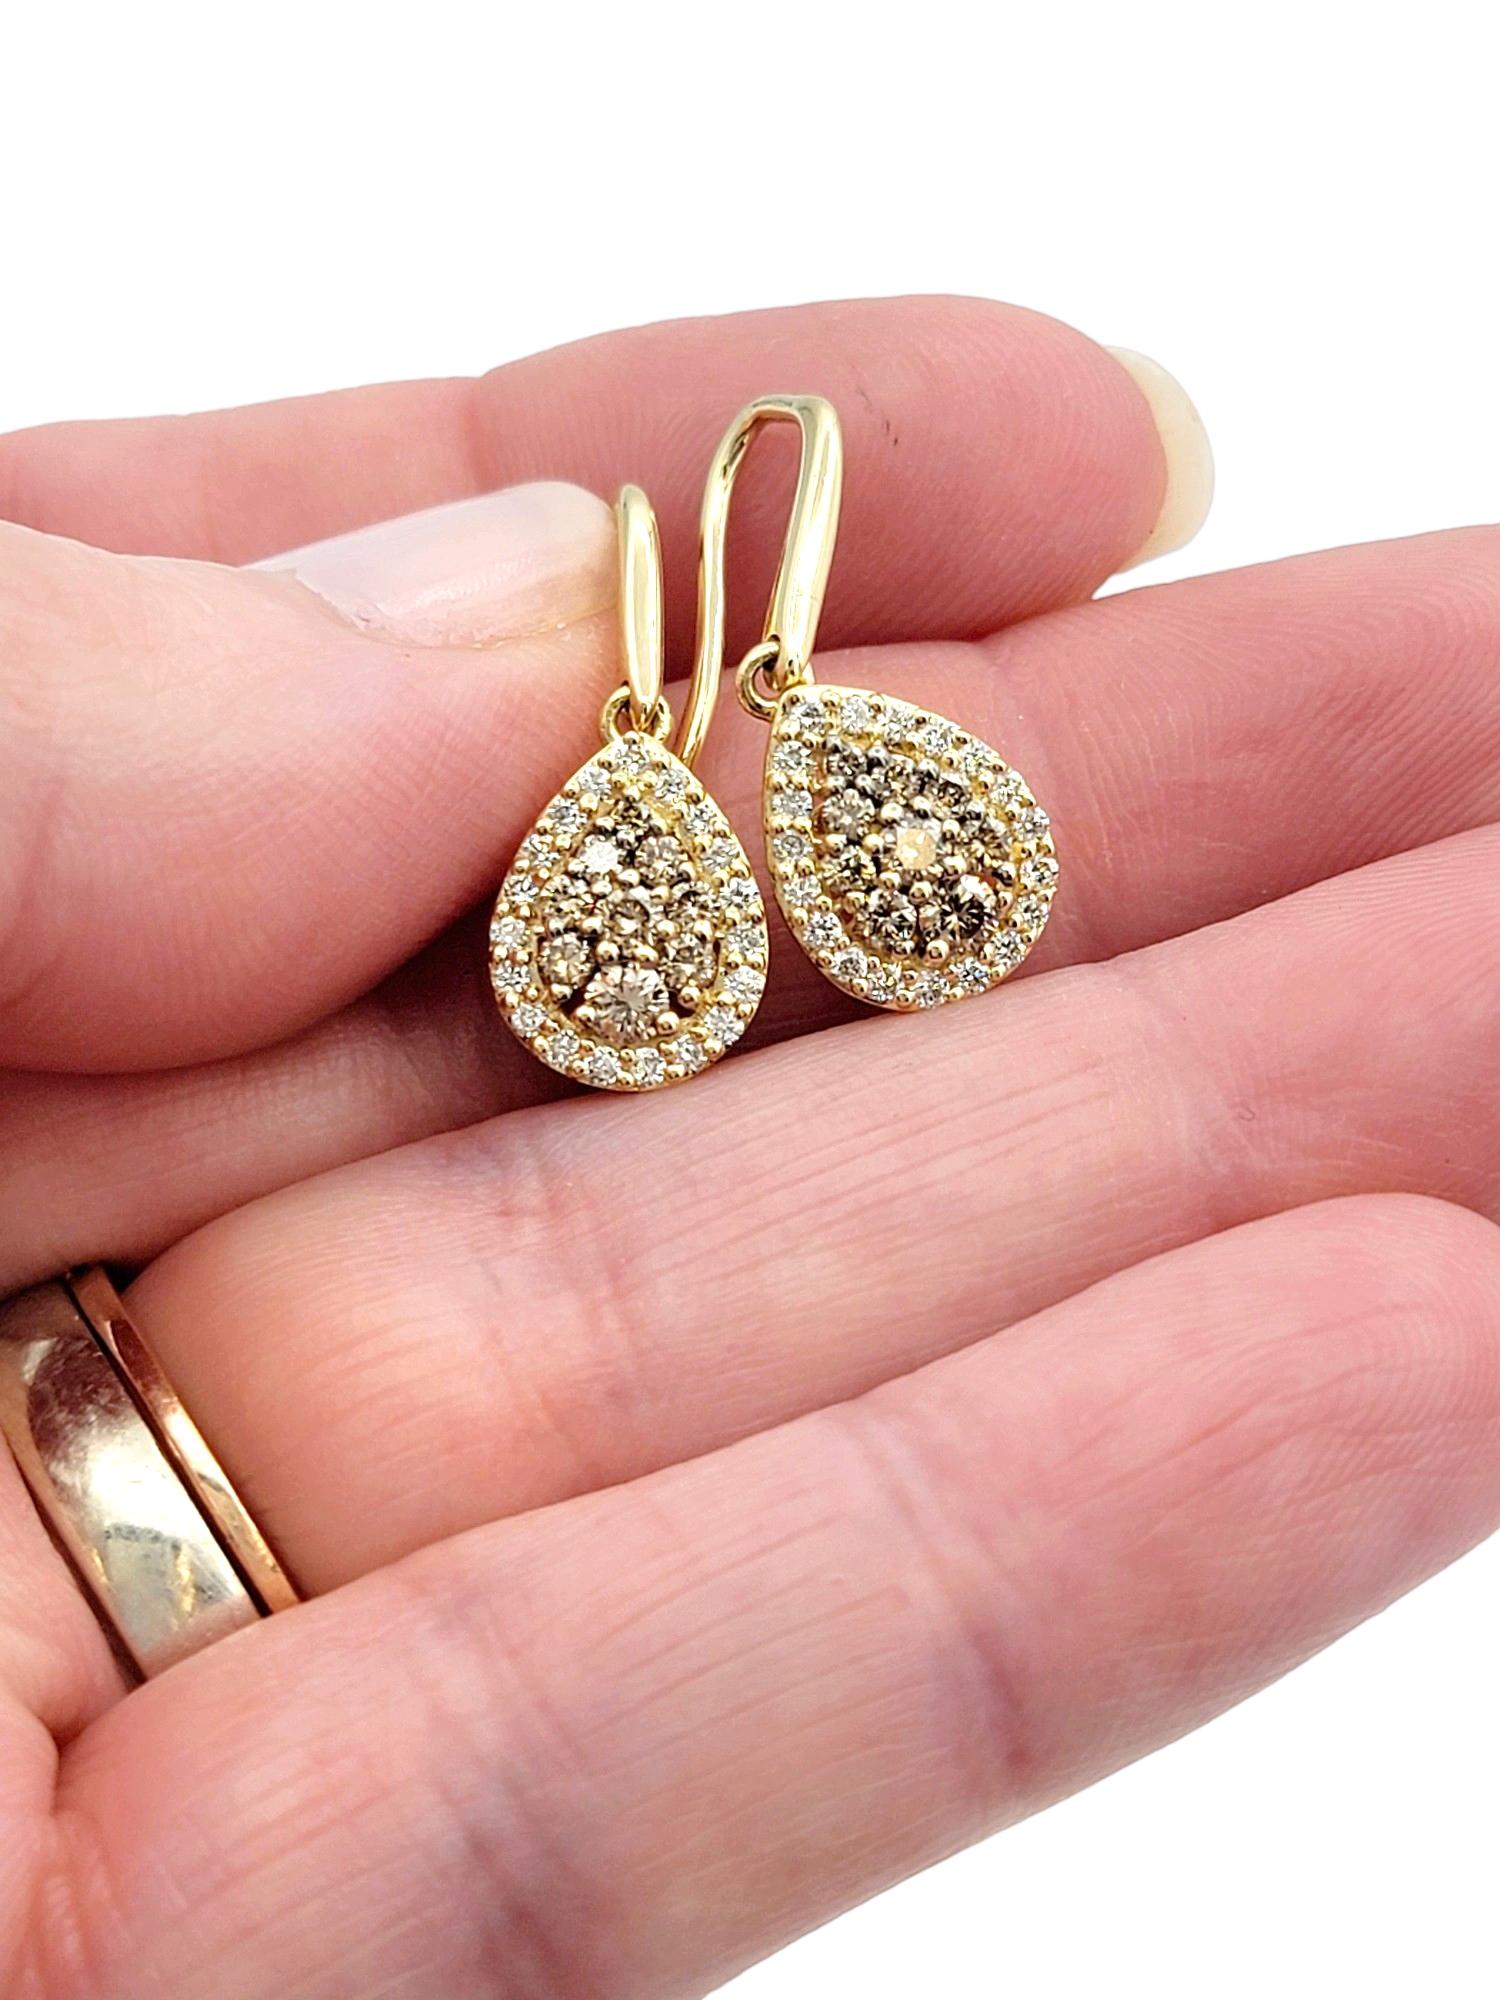 Le Vian Chocolate and White Diamond Dangle Earrings Set in 14 Karat Yellow Gold For Sale 1